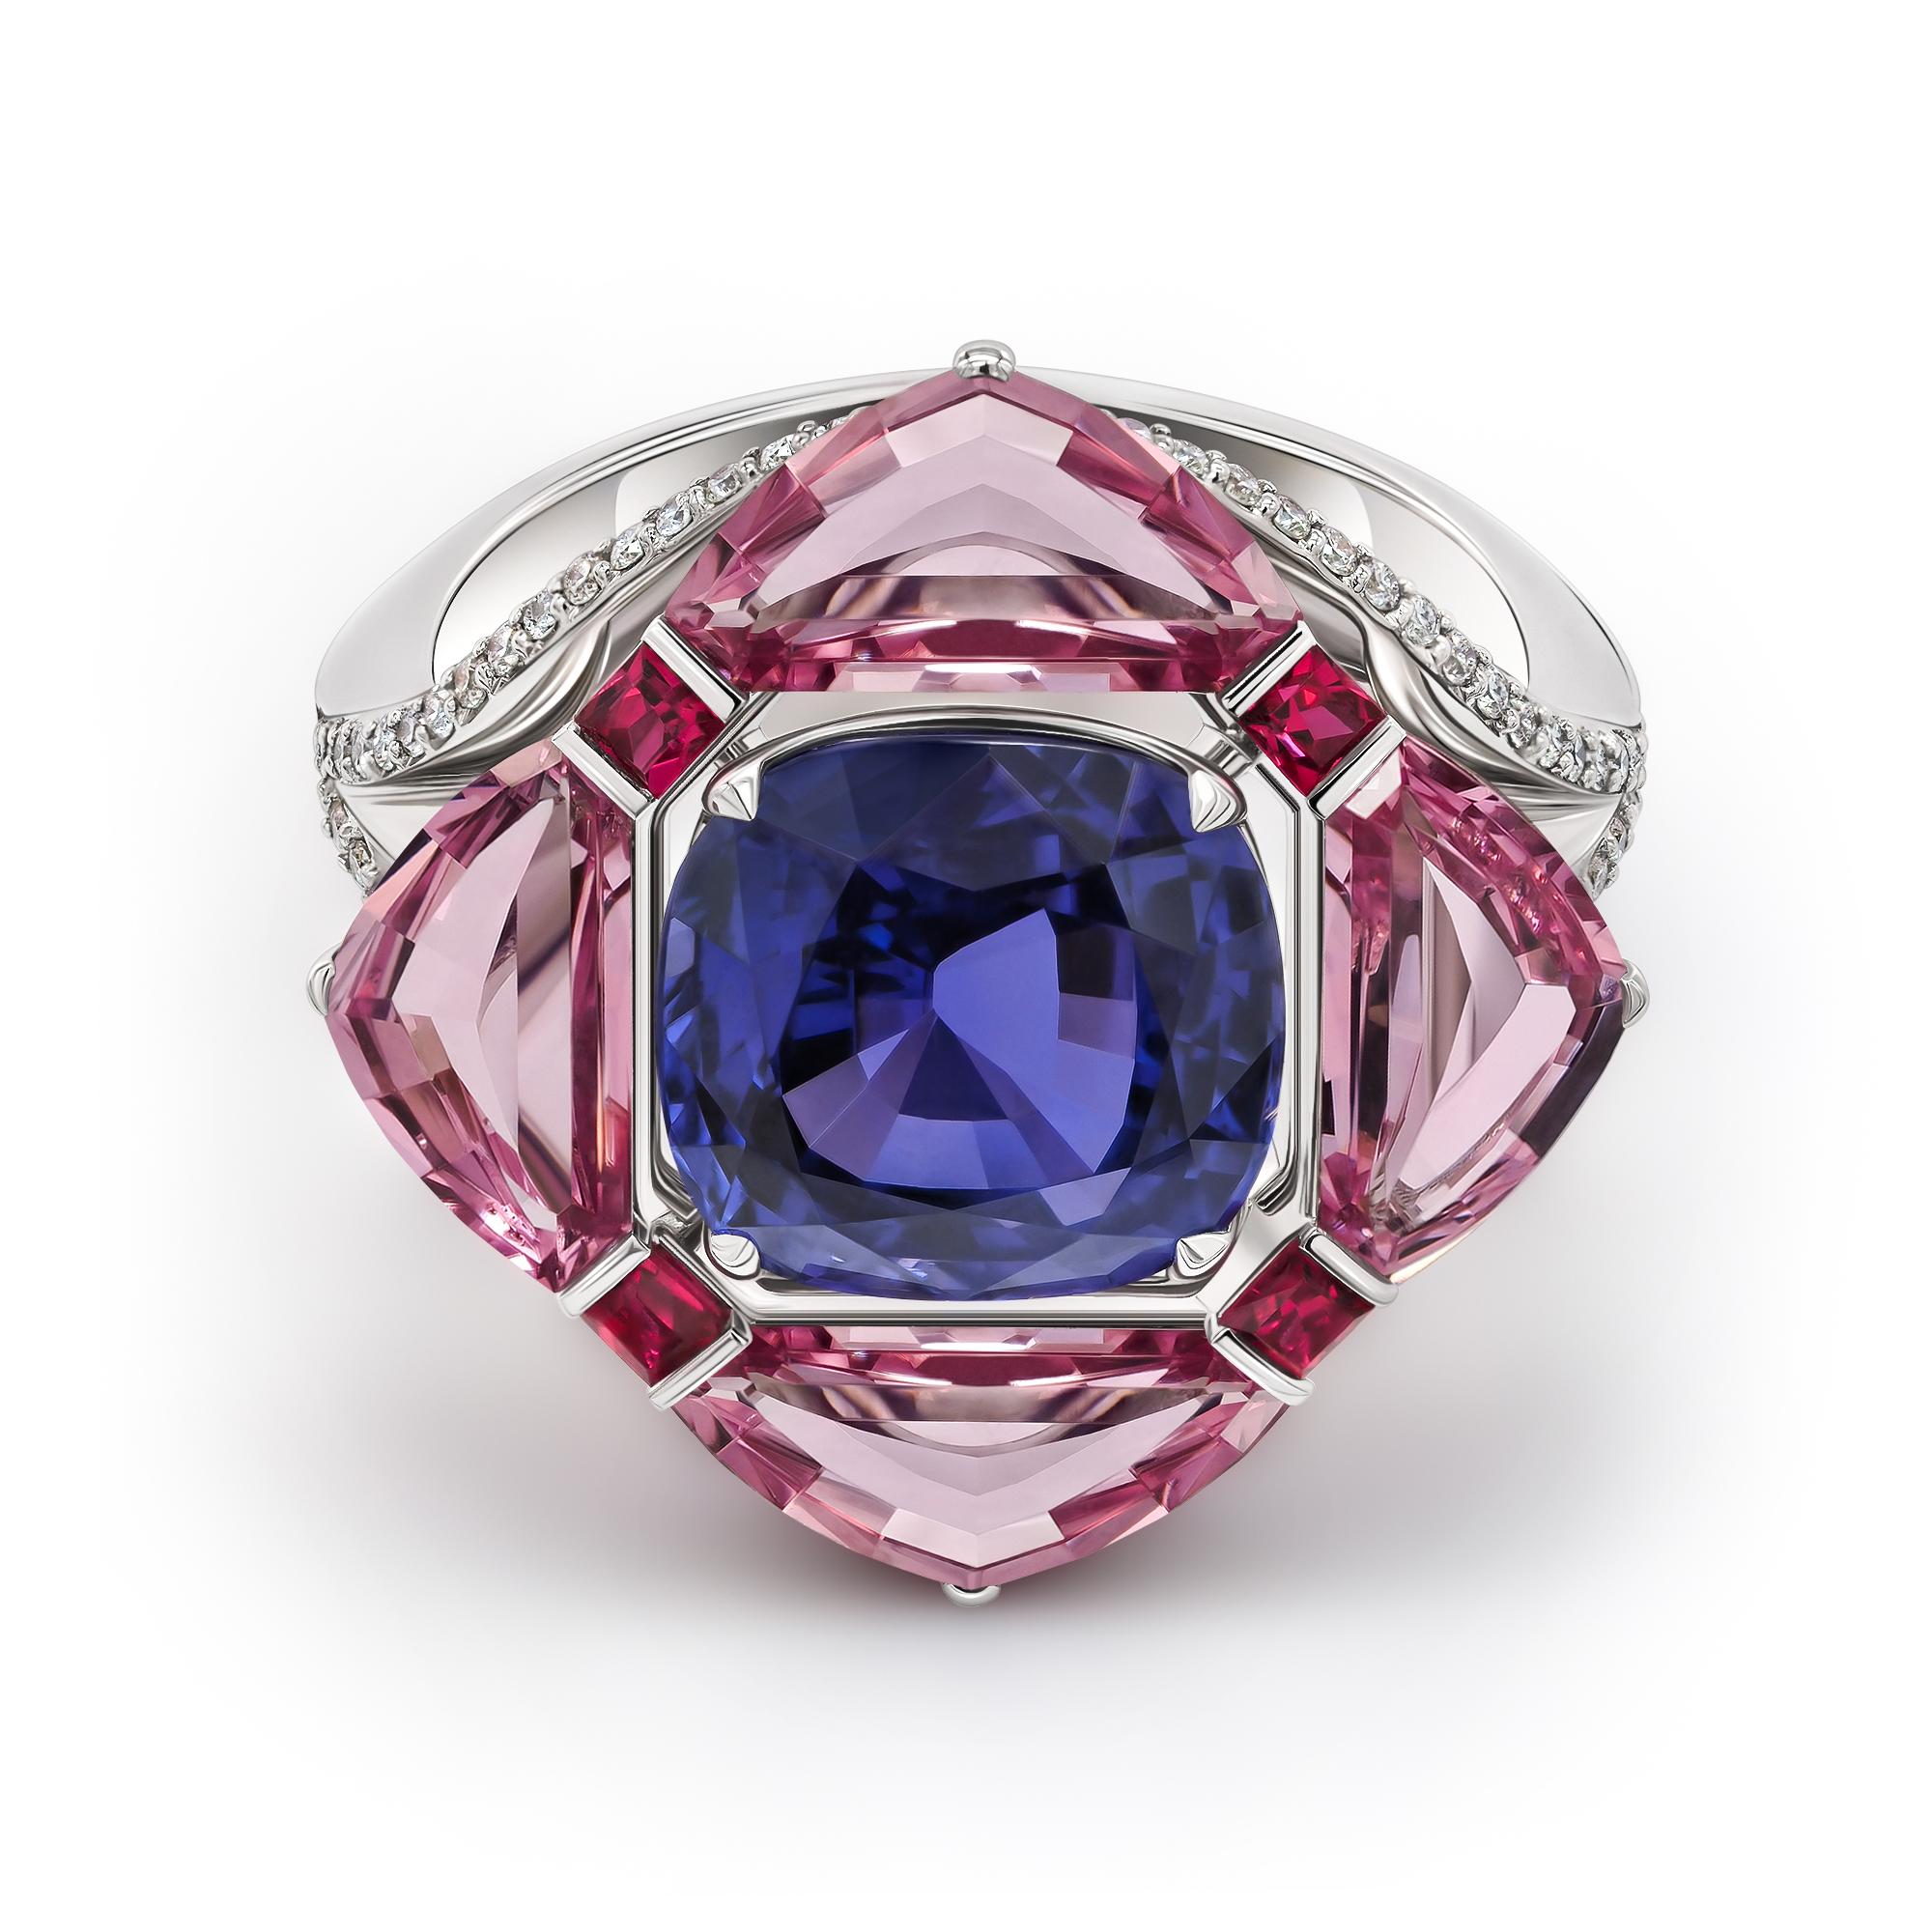 •	18k white gold Unheated blue sapphire in cushion cut total carat weight 5.15 surrounded by fancy cut pink spinels total carat weight 3.06. 
•	Spinels – 4 pink in fancy cut total carat weight – 3.06. 
•	Spinels – 4 red in square cut, total weight